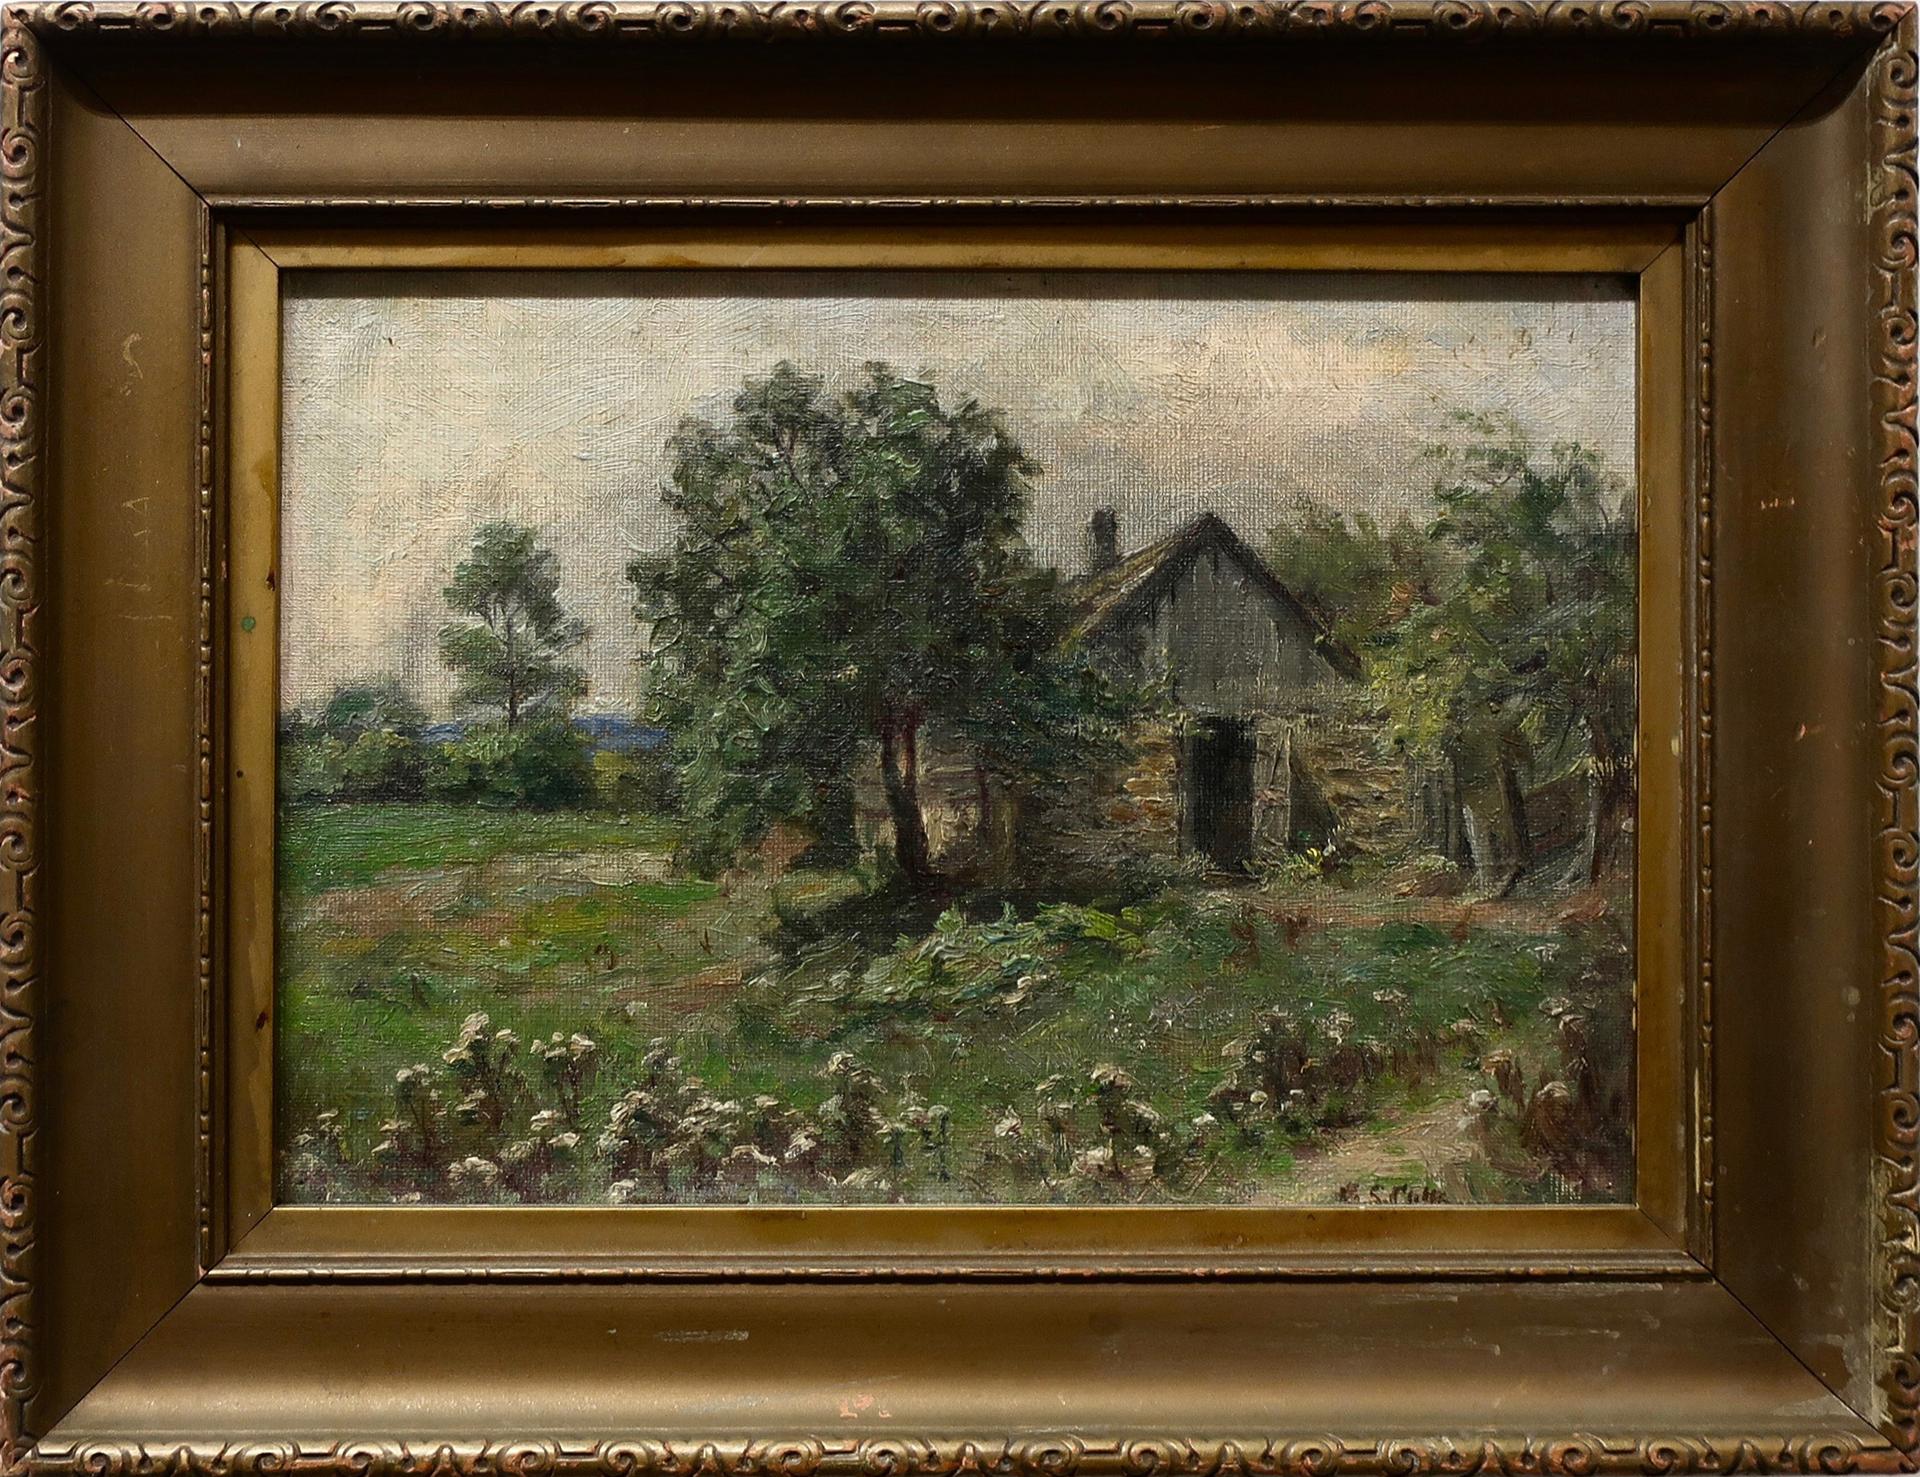 Gertrude Eleanor Spurr Cutts (1858-1941) - The Old Barn